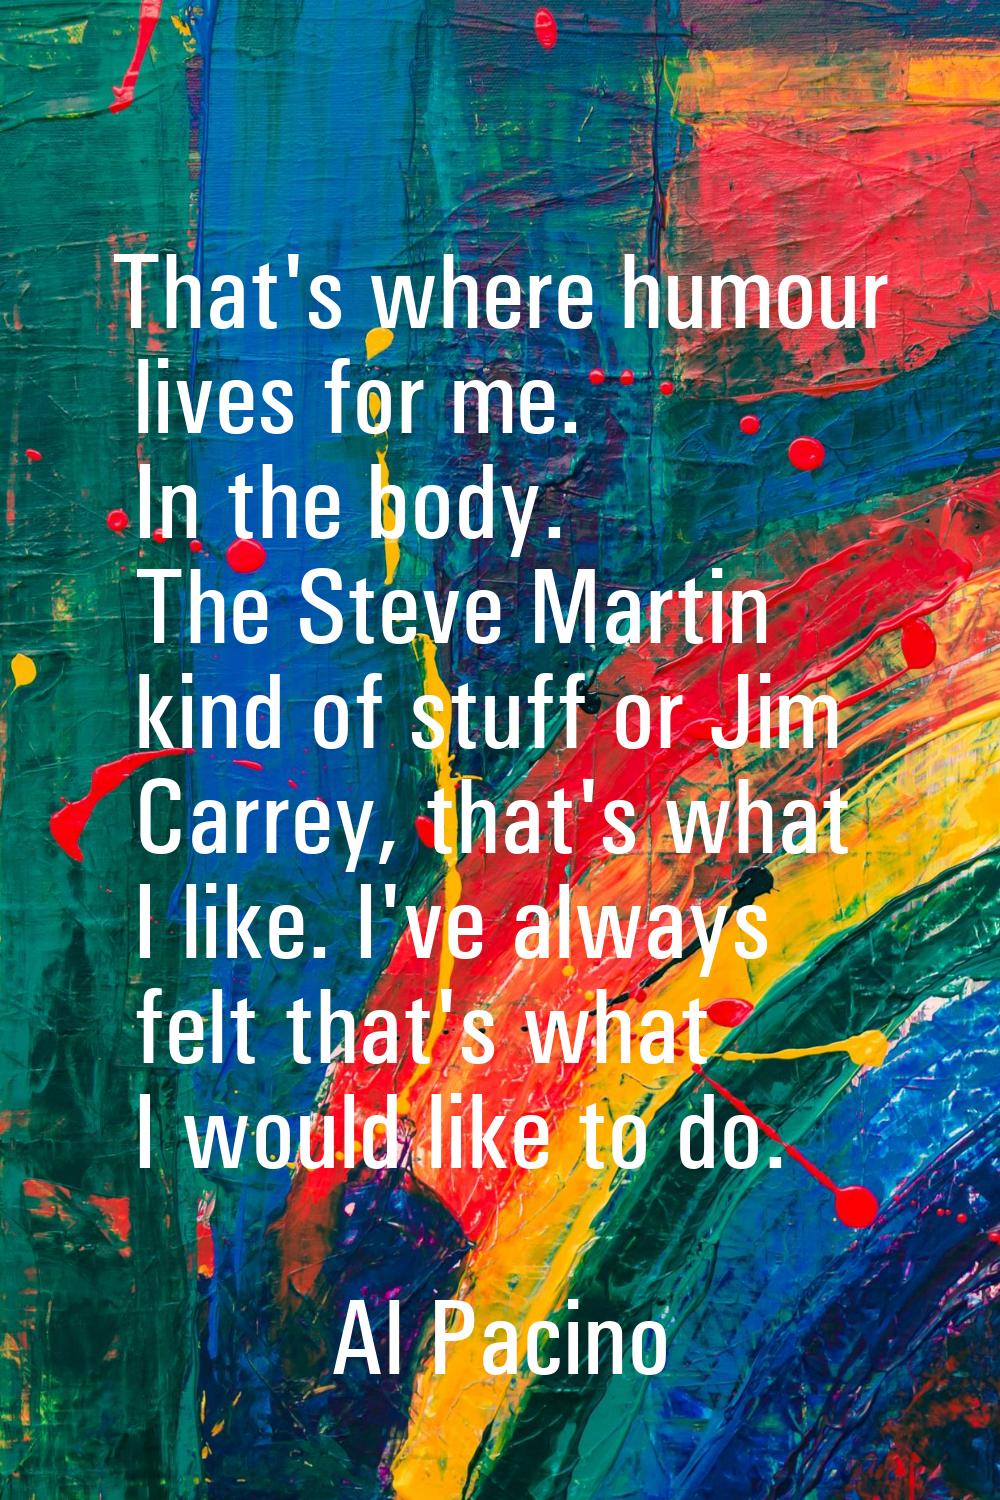 That's where humour lives for me. In the body. The Steve Martin kind of stuff or Jim Carrey, that's